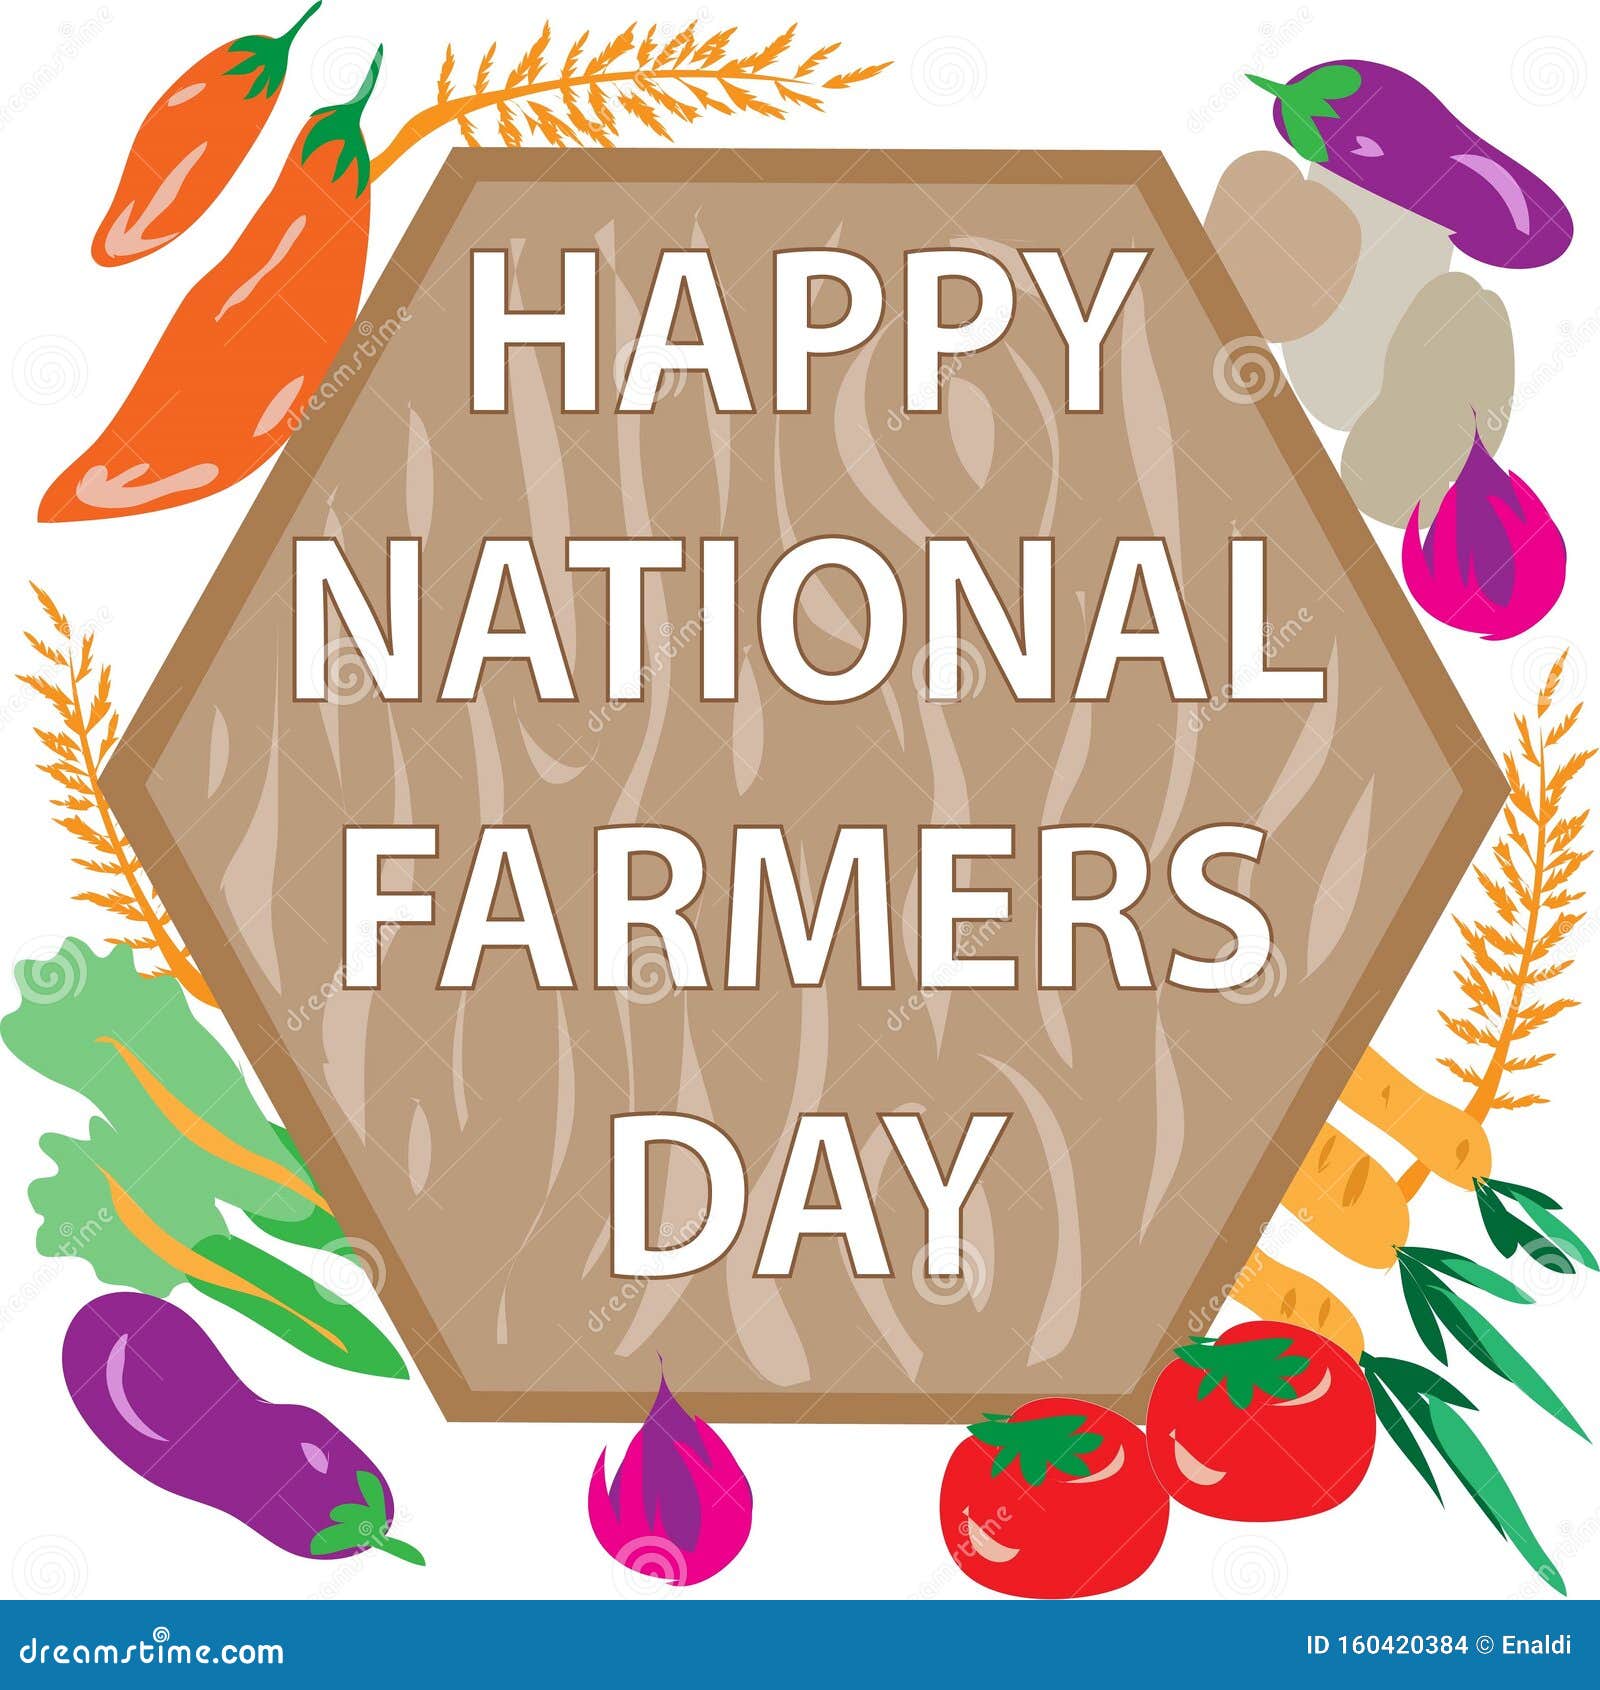 Happy National Farmers Day Sign Stock Vector Illustration of national